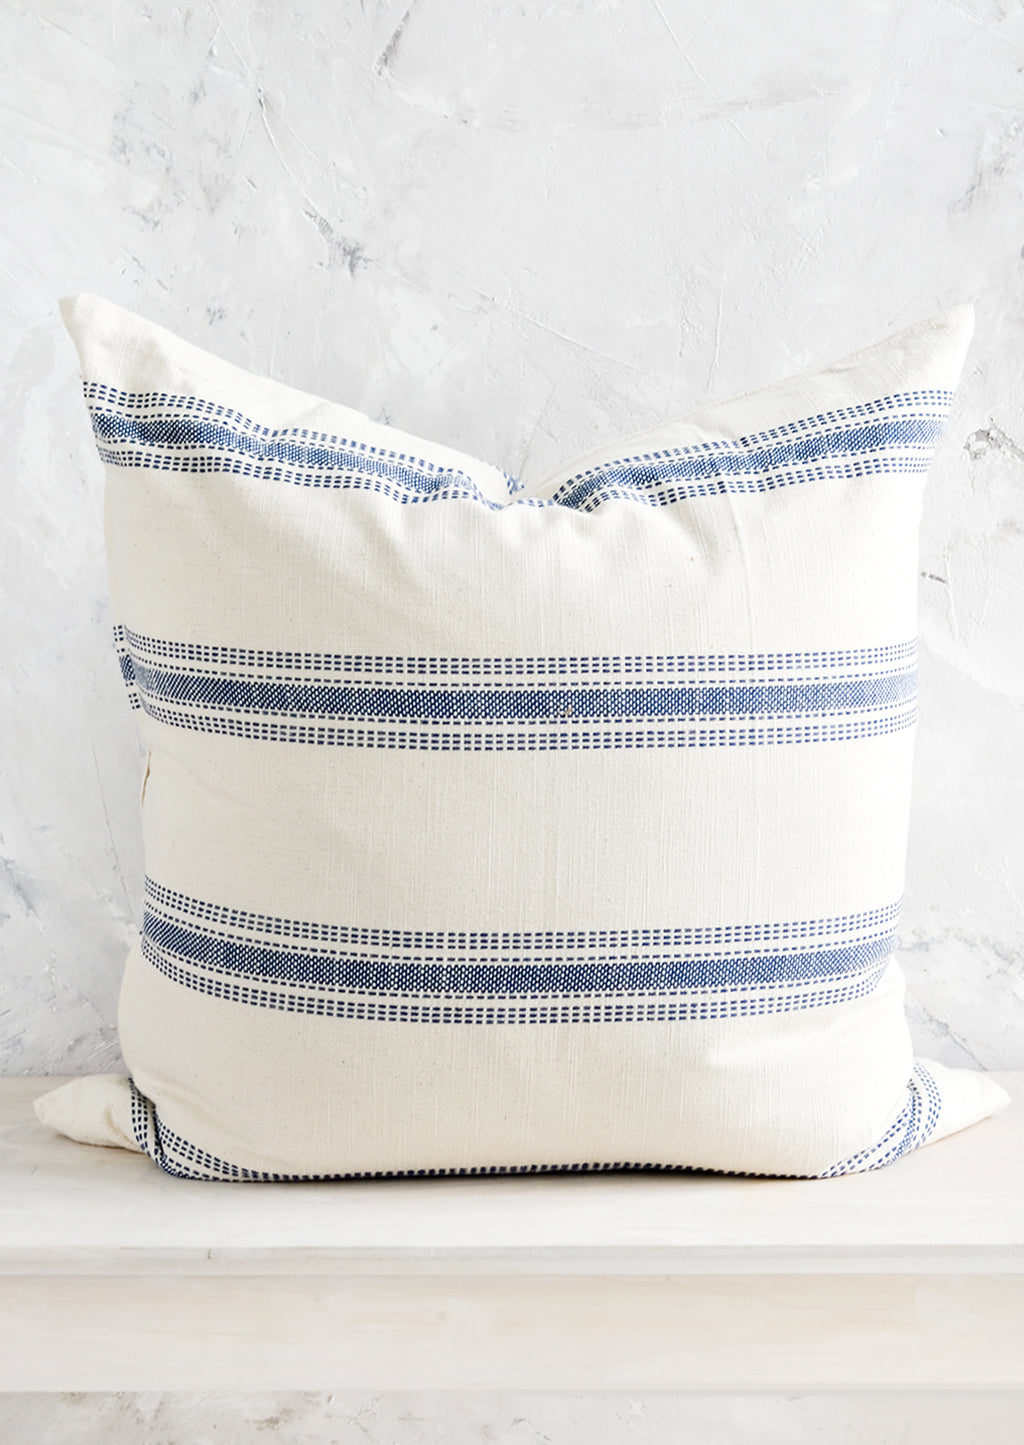 1: A large, square-shaped throw pillow in cream cotton with horizontal embroidered blue stripes.